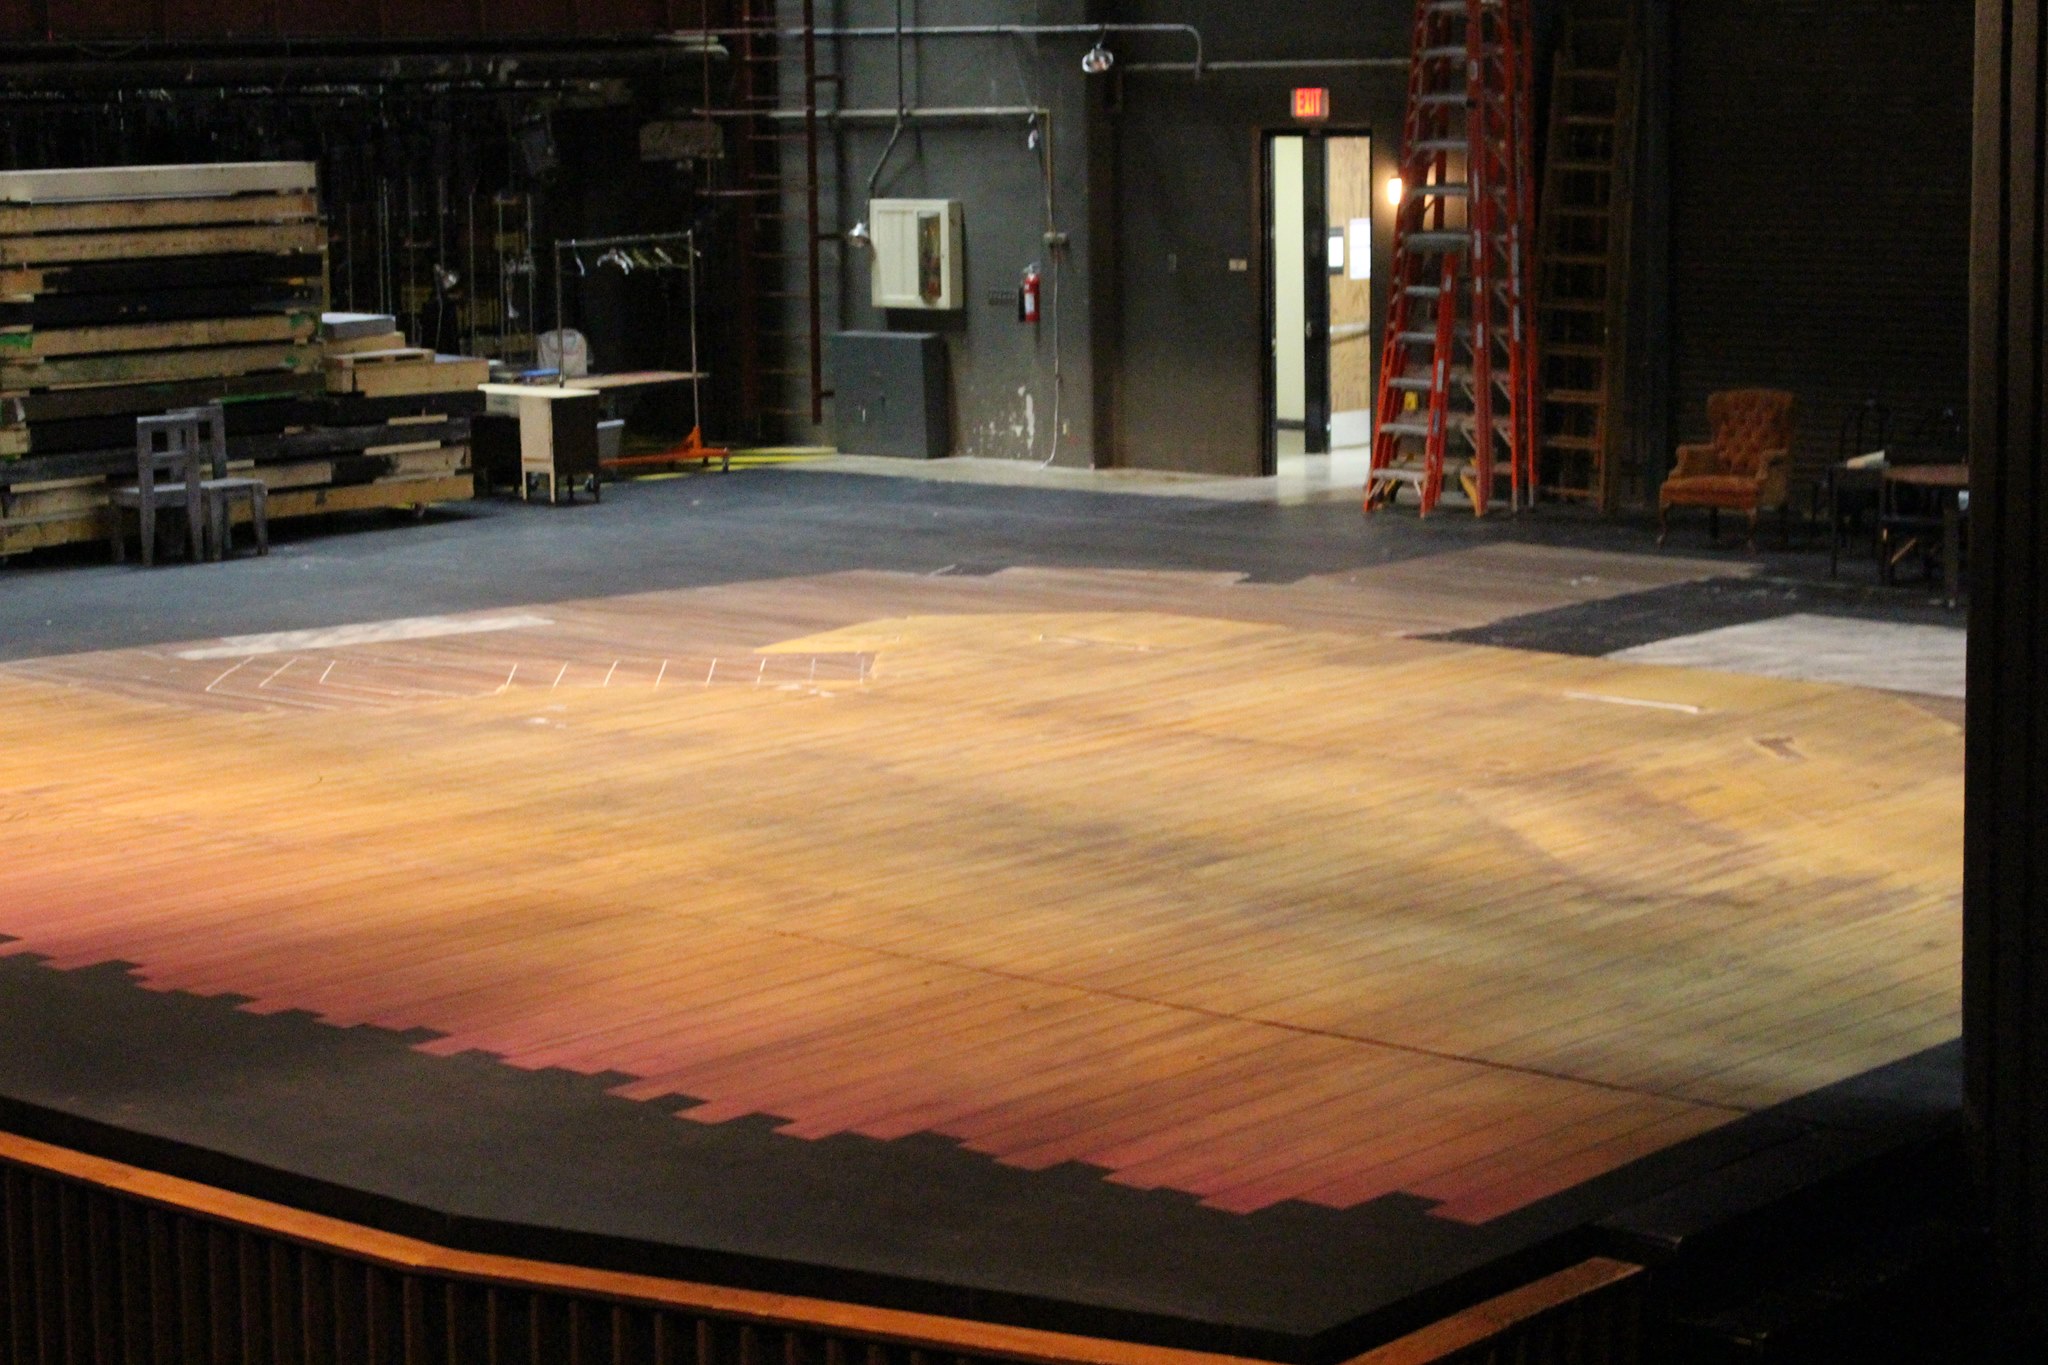 New developments coming to UCM’s Theatre Department